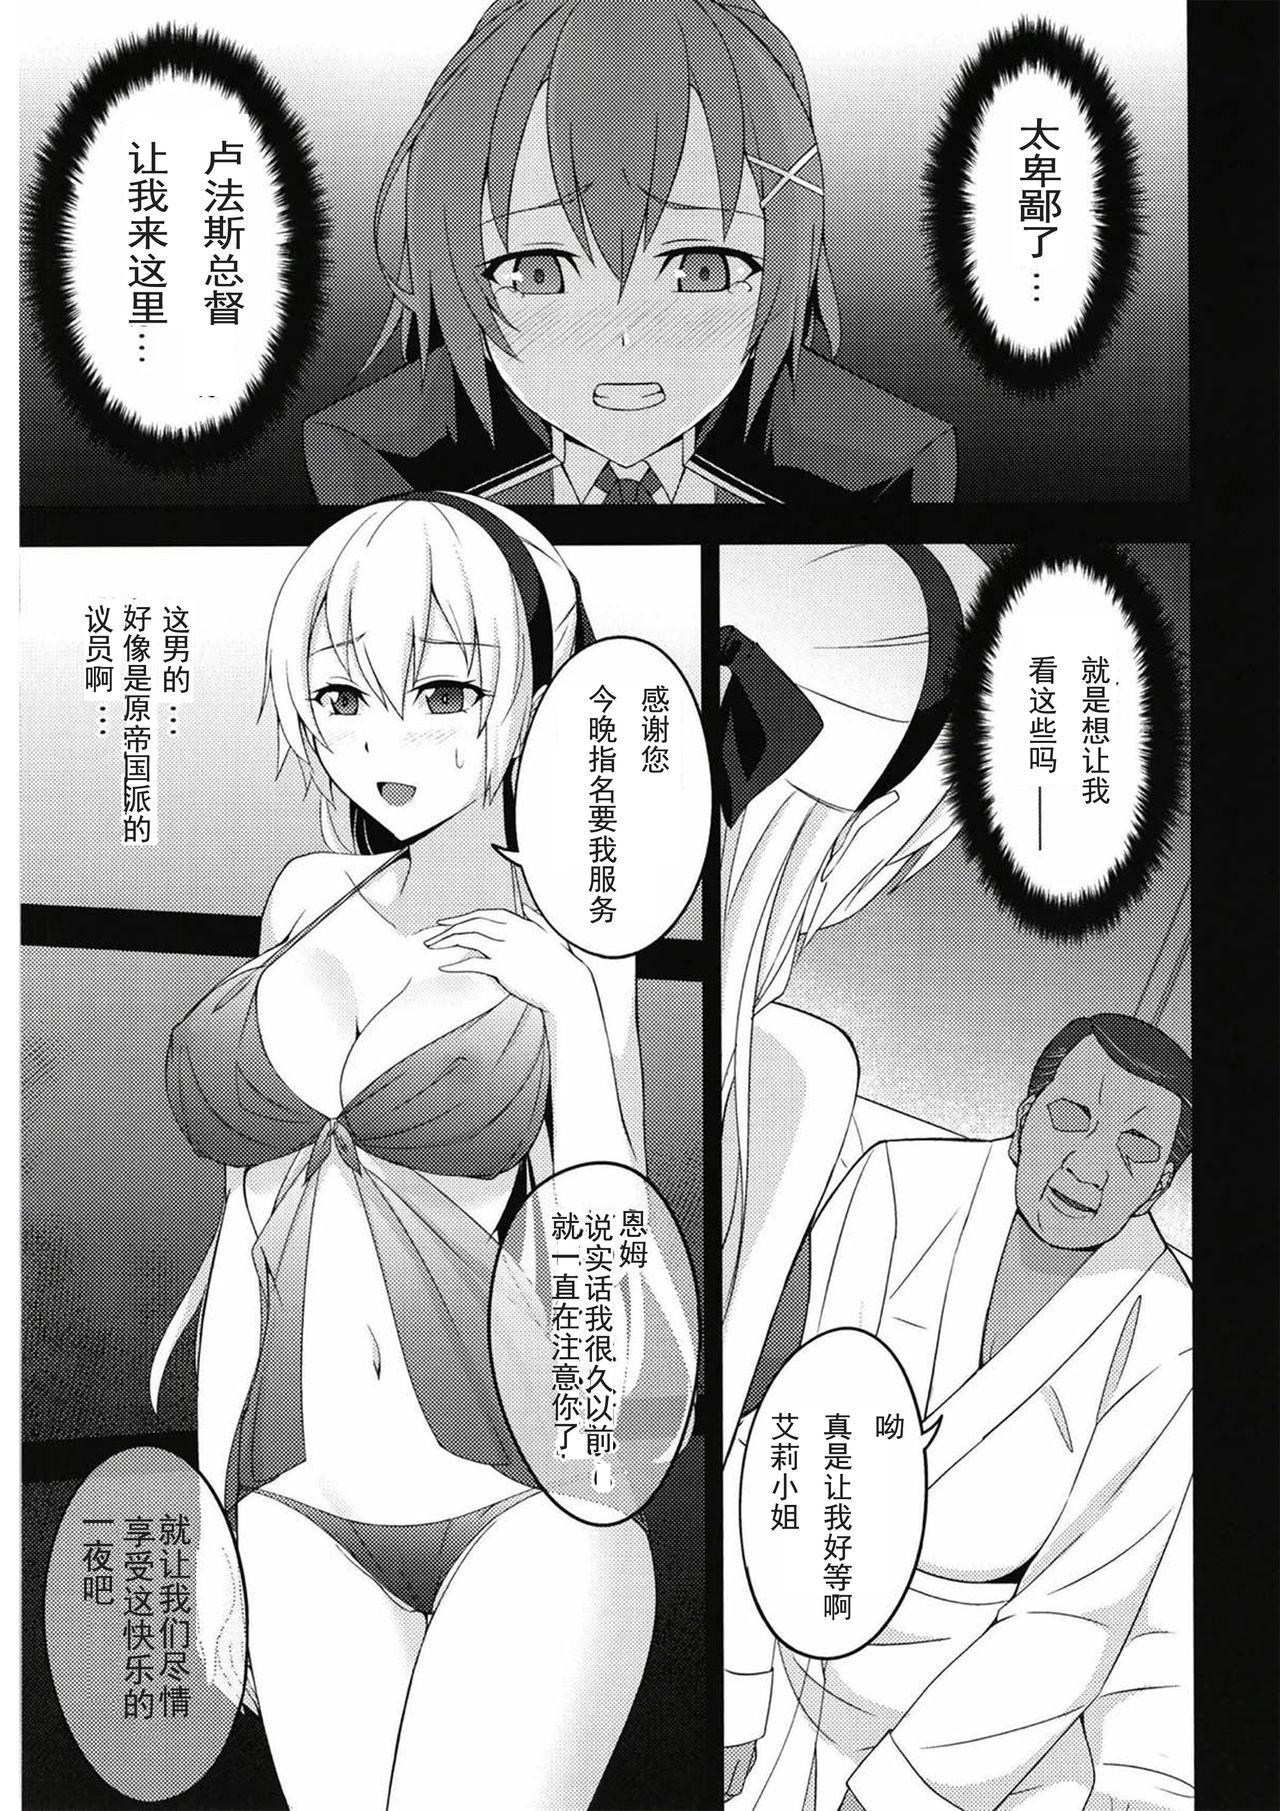 Perfect Butt Torikago no Yoru - The legend of heroes Oldyoung - Page 10